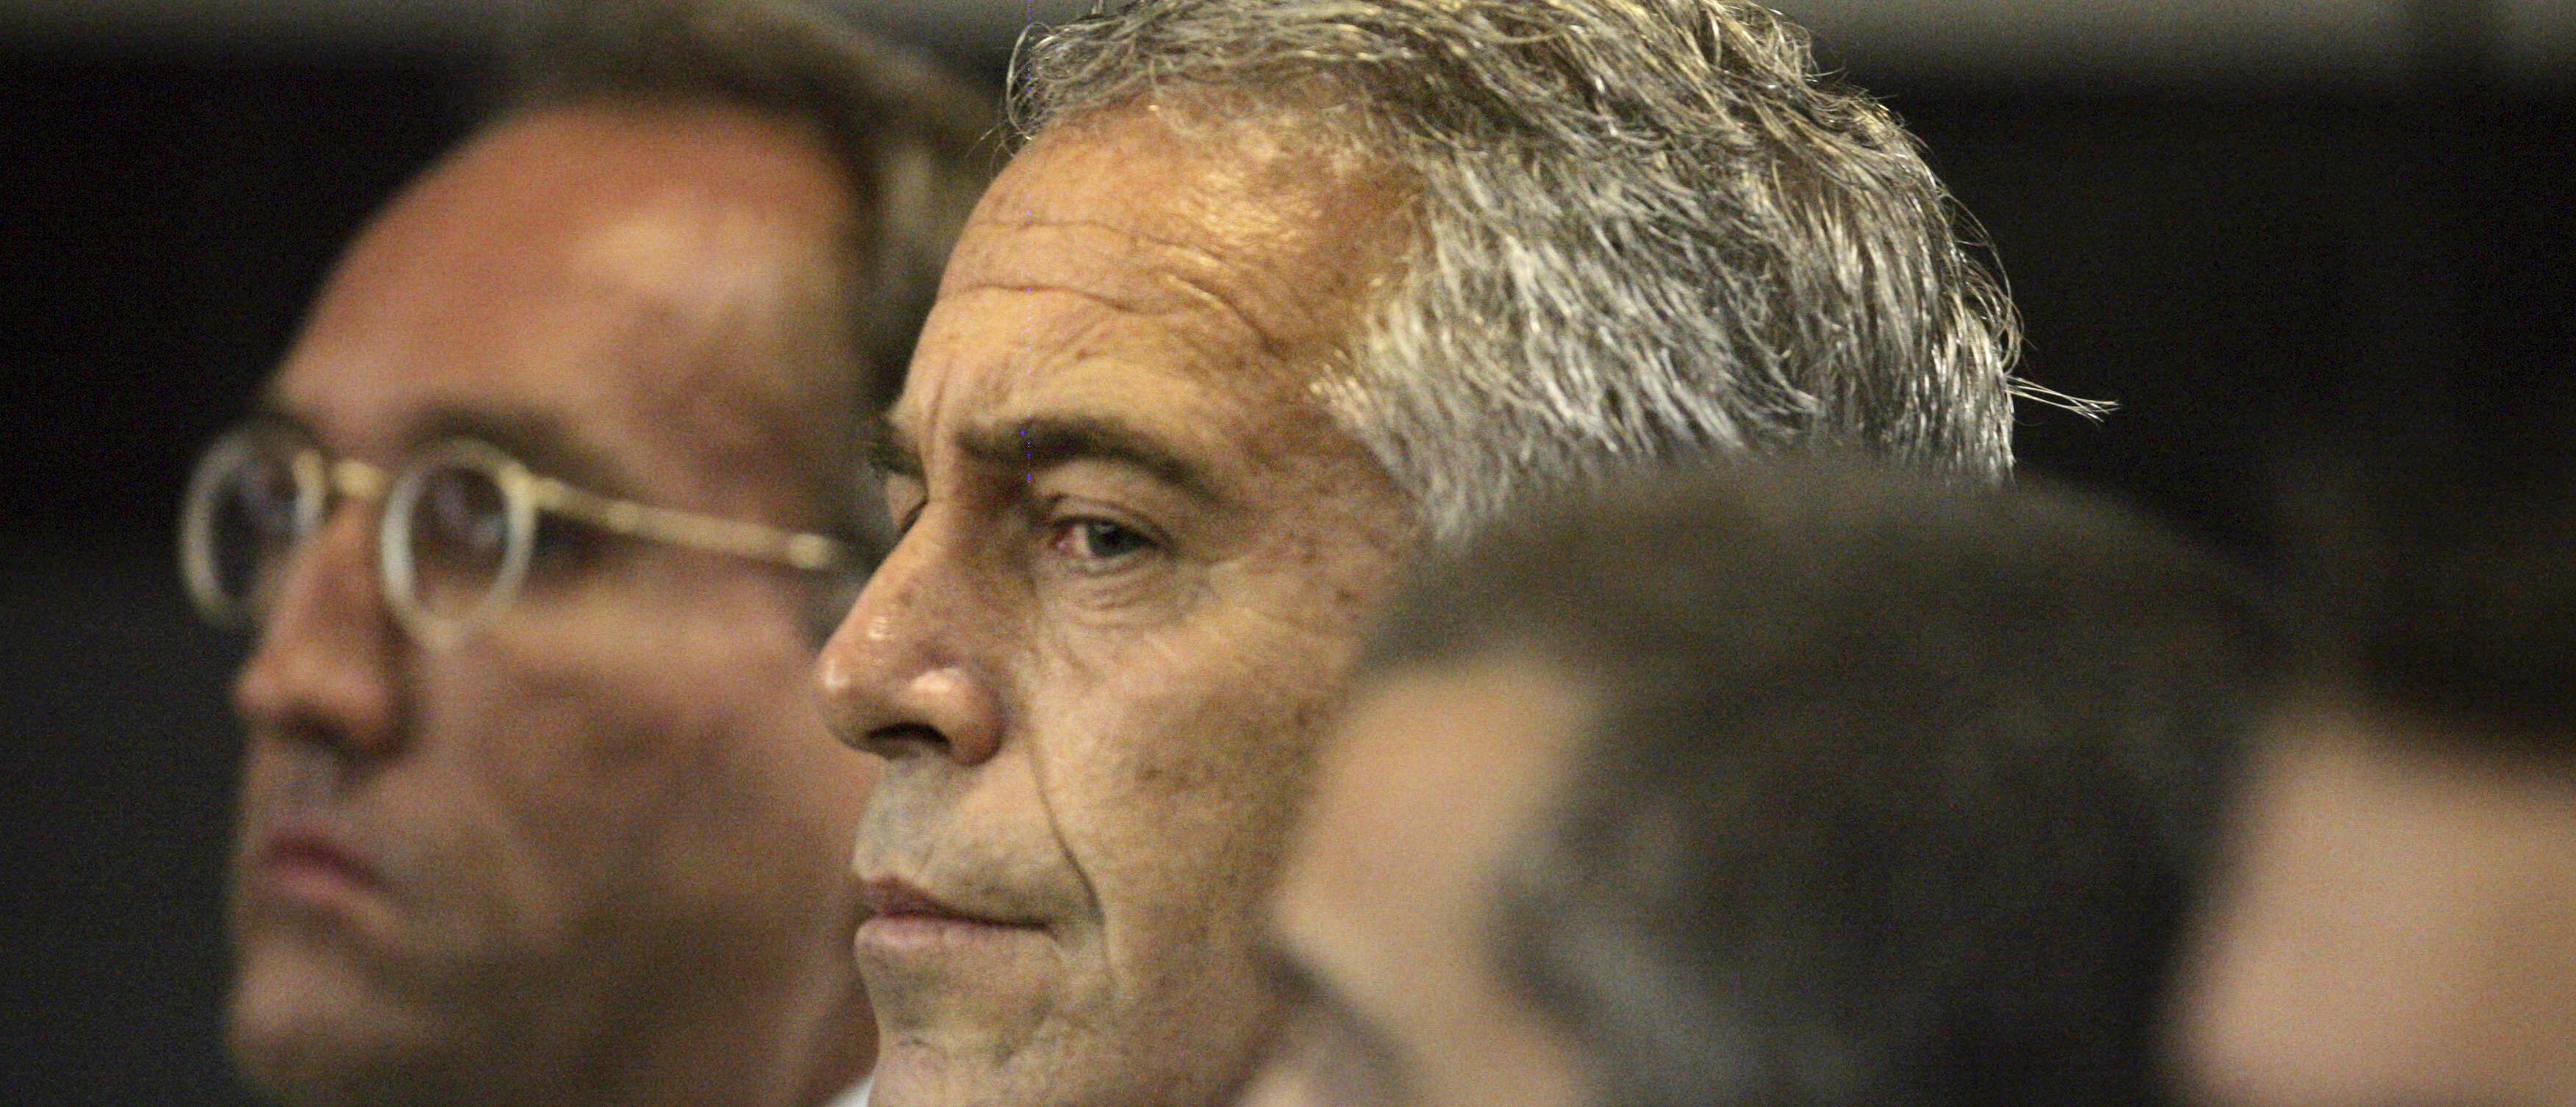 U.S. financier Jeffrey Epstein (C) appears in court where he pleaded guilty to two prostitution charges in West Palm Beach, Florida, U.S. July 30, 2008. Picture taken July 30, 2008. Uma Sanghvi/Palm Beach Post via REUTERS.